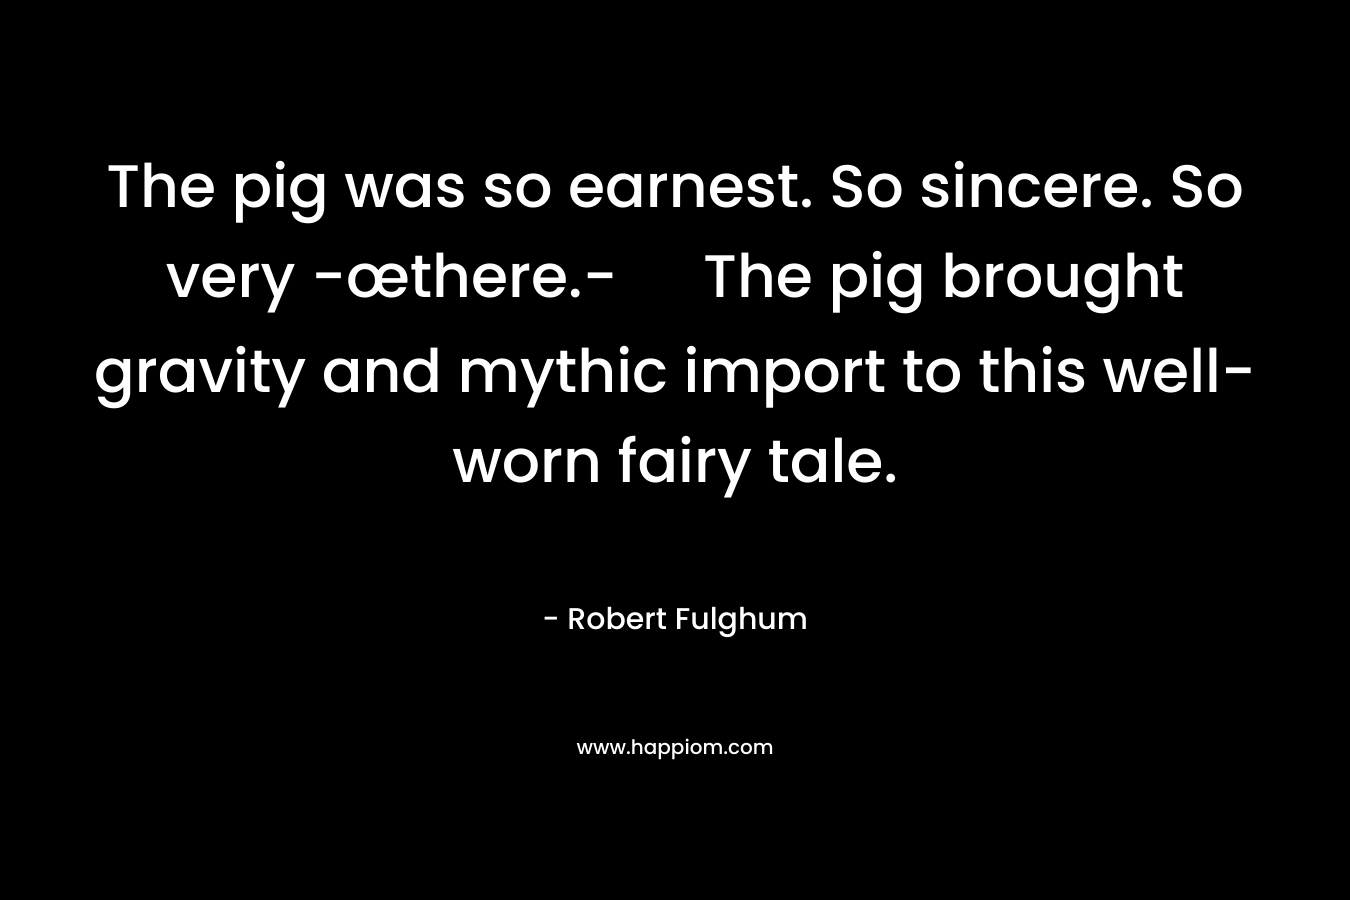 The pig was so earnest. So sincere. So very -œthere.- The pig brought gravity and mythic import to this well-worn fairy tale. – Robert Fulghum